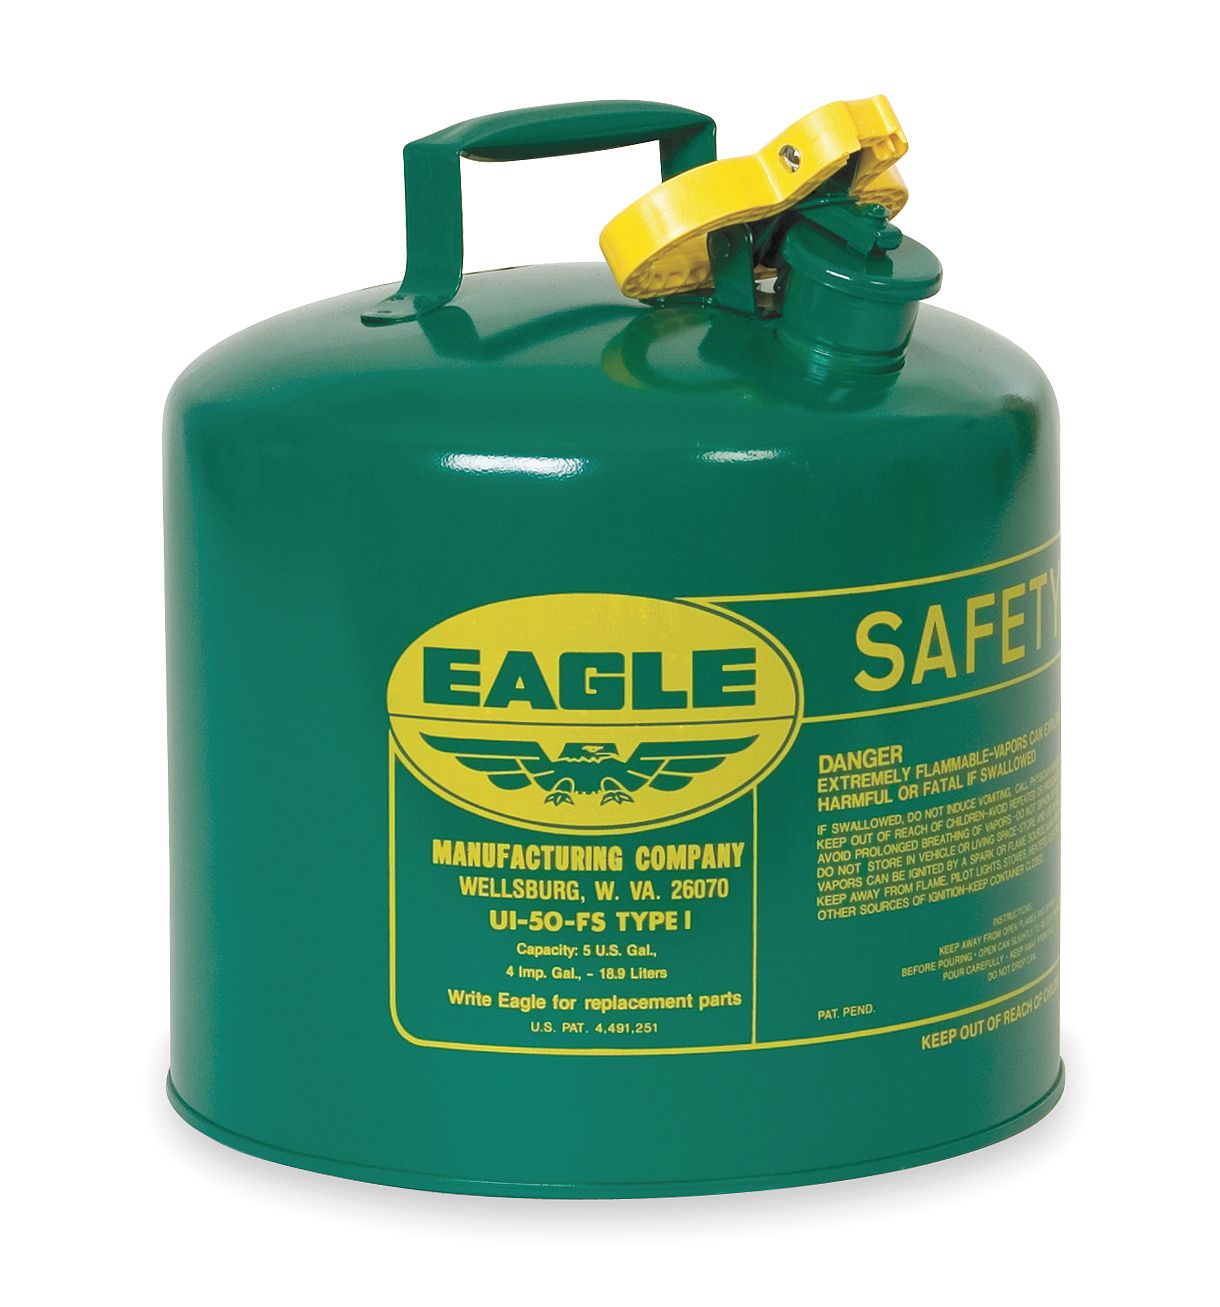 Eagle Mfg - UI-50-SG-EA - Eagle Green Galvanized Steel Self-Closing 5 gal Safety Can - 13 1/2 in Height - 12 1/2 in